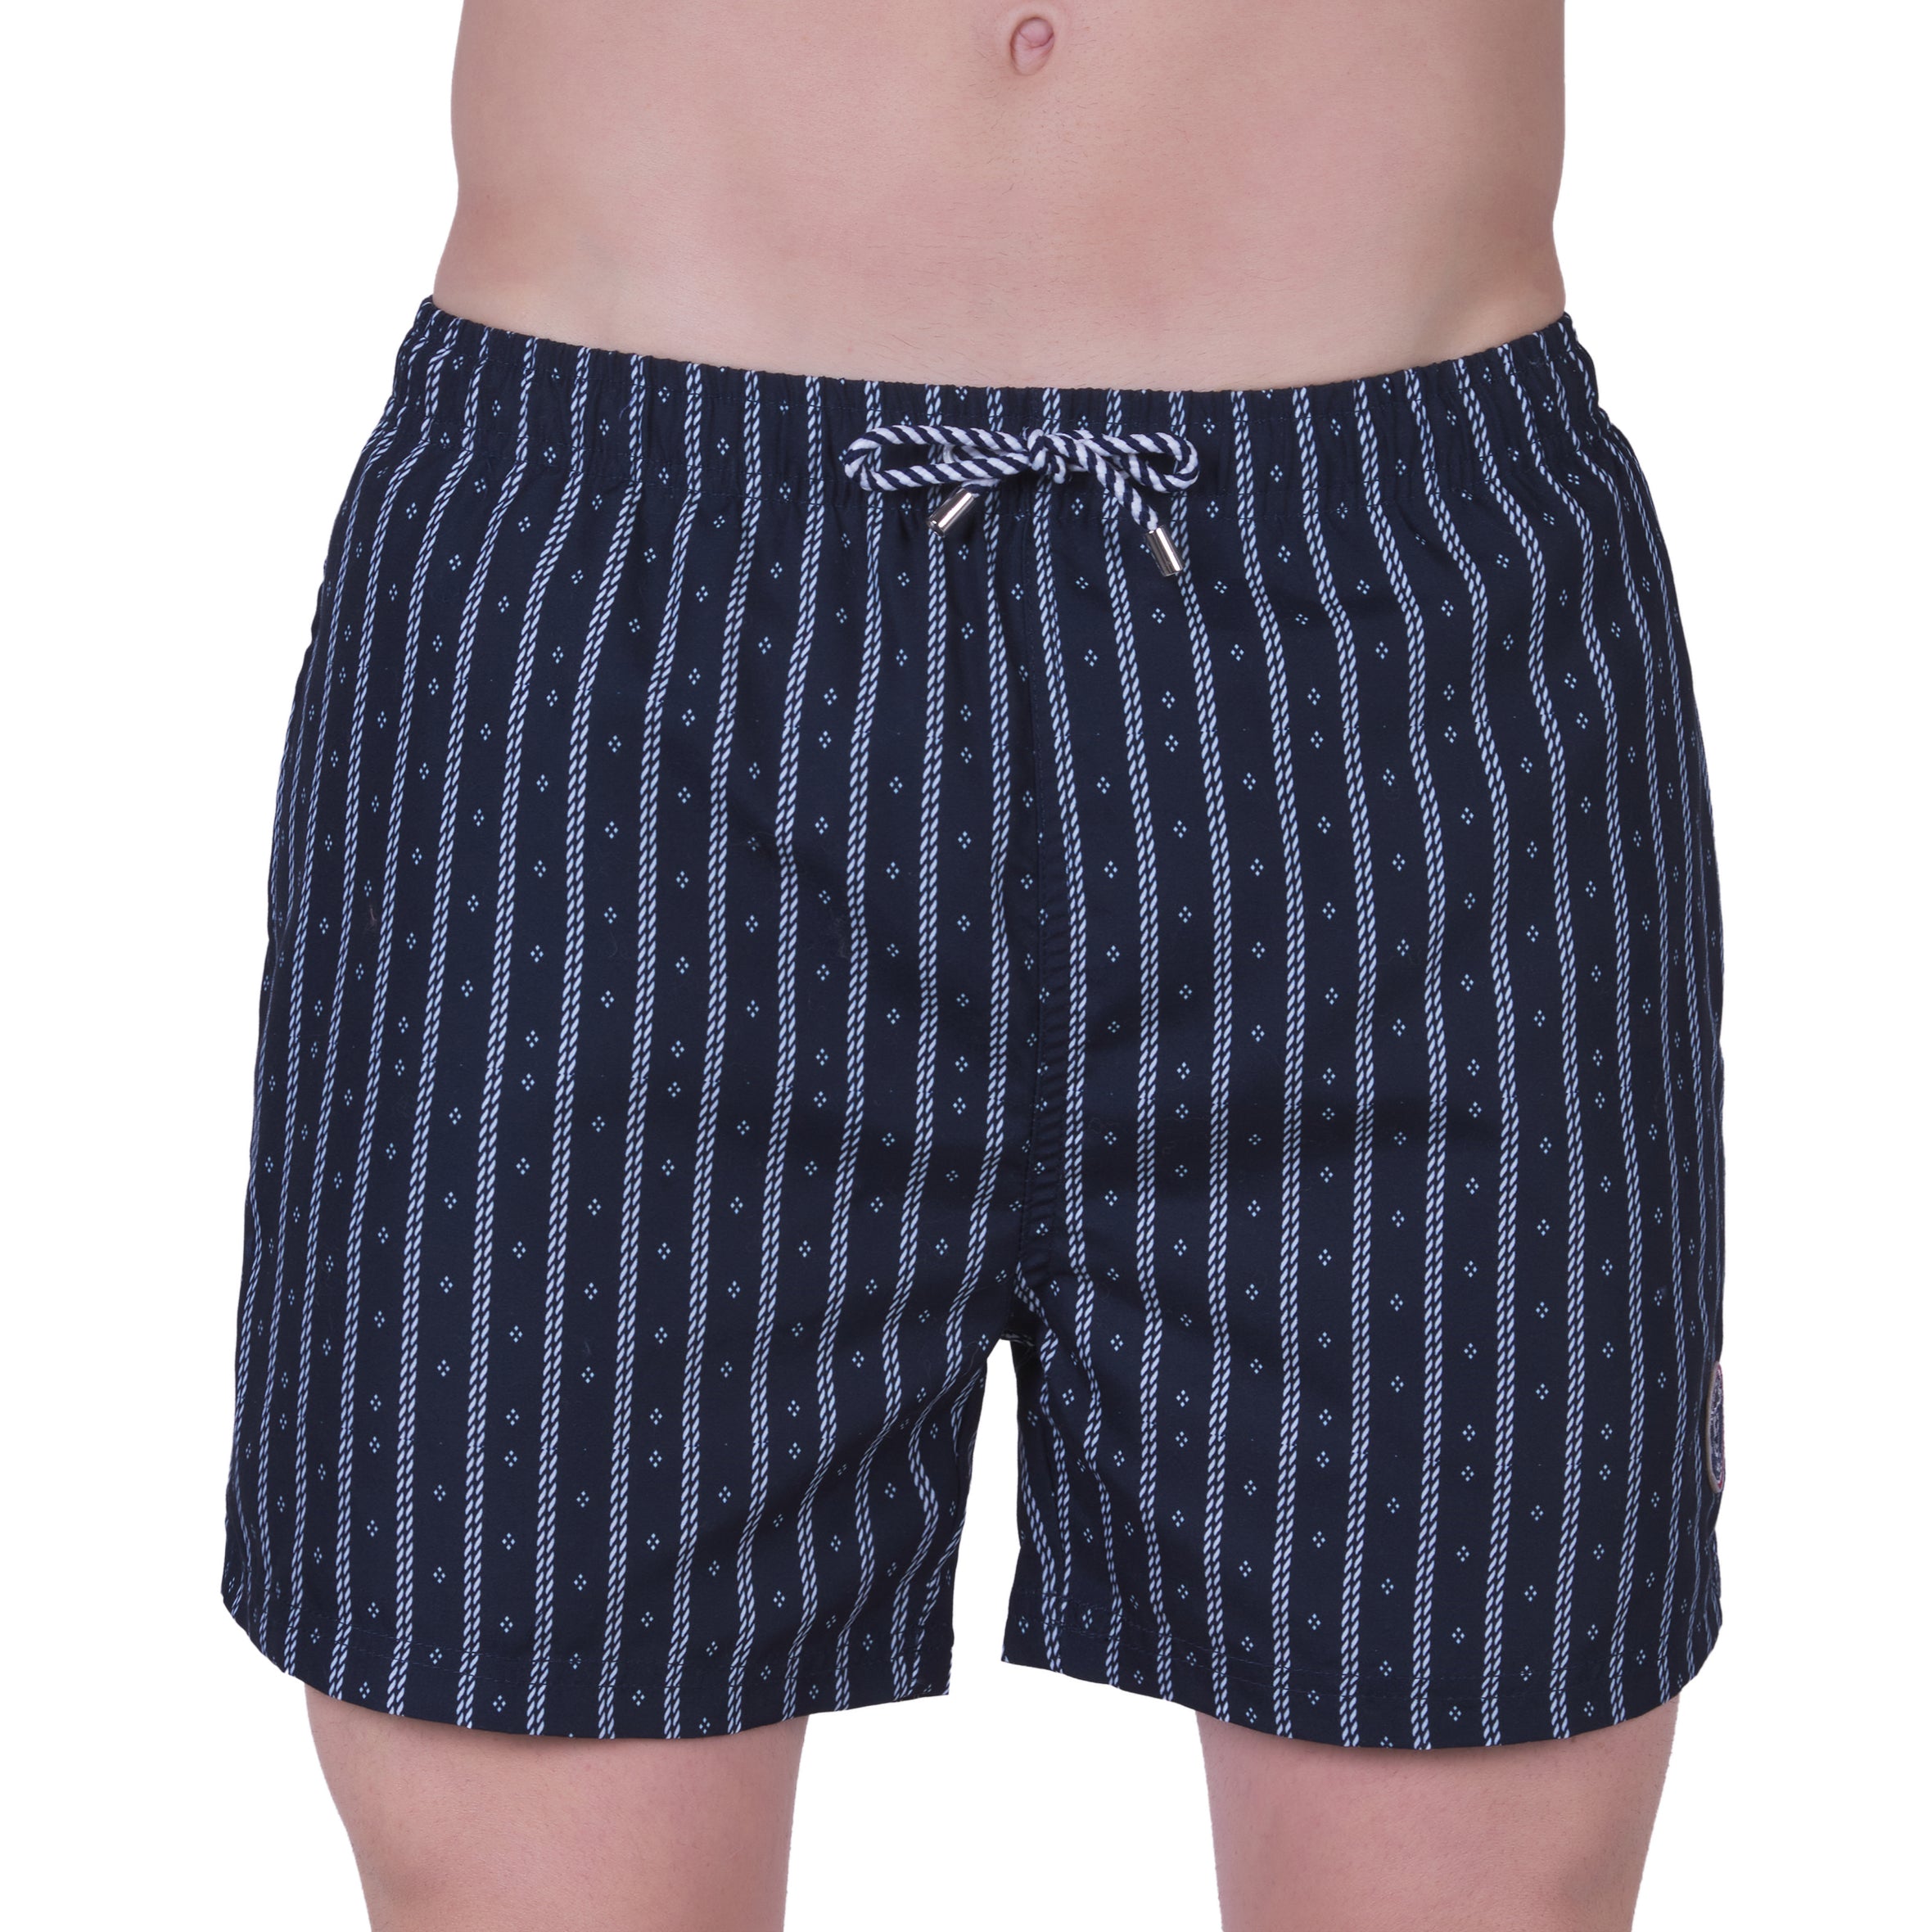 Printed swim shorts with mesh lining, NAVY. With travel pouch!